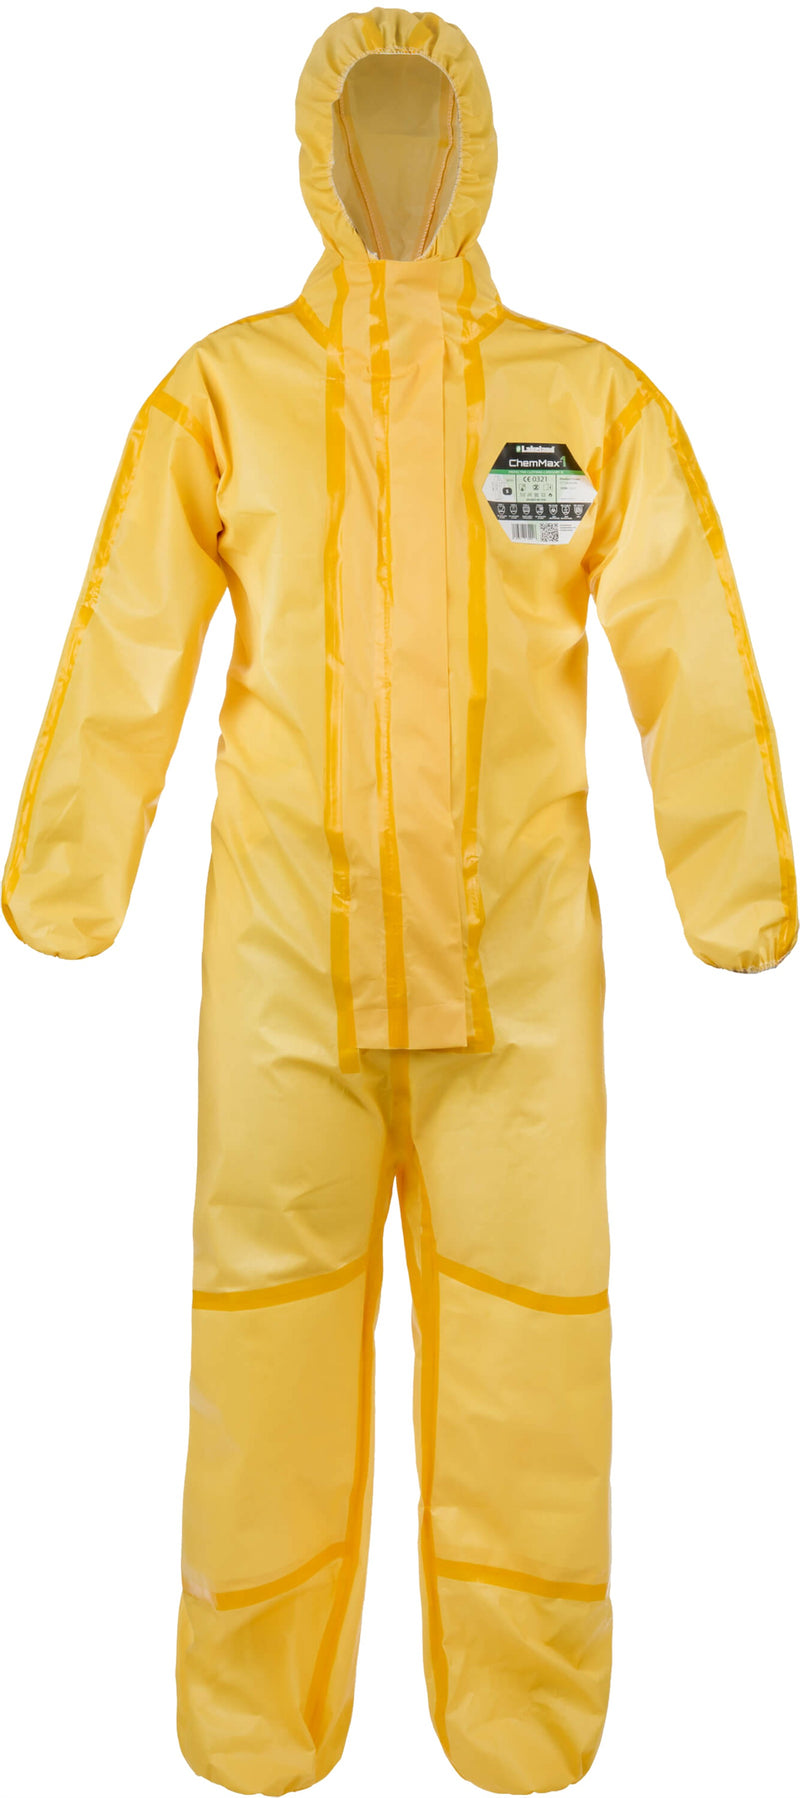 ChemMax® 1 chemical protective Coverall